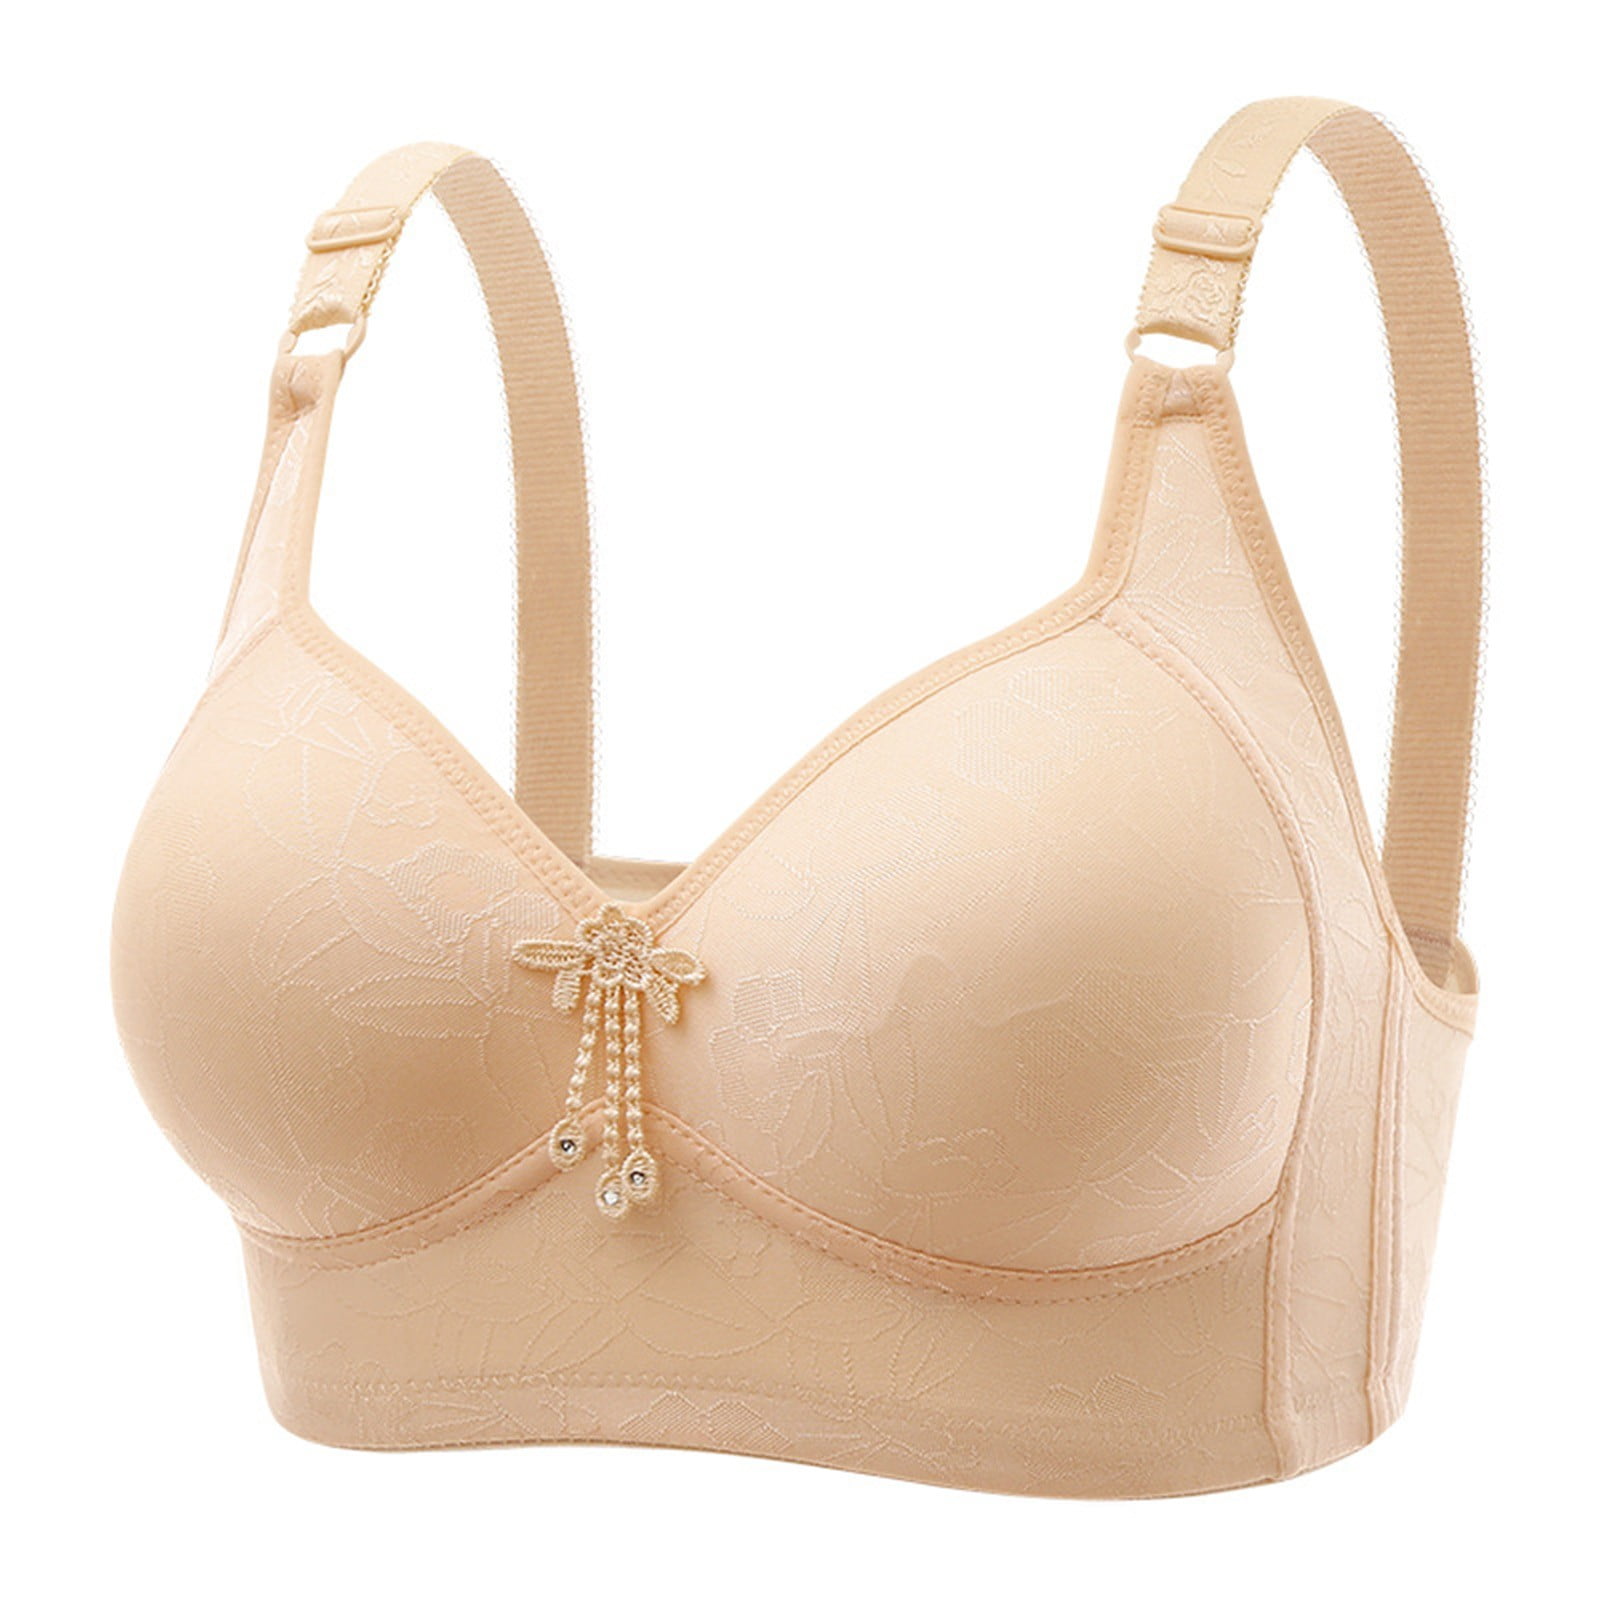 Exquisite Form Fully® Original Wirefree Support Bra - Style 5100532 